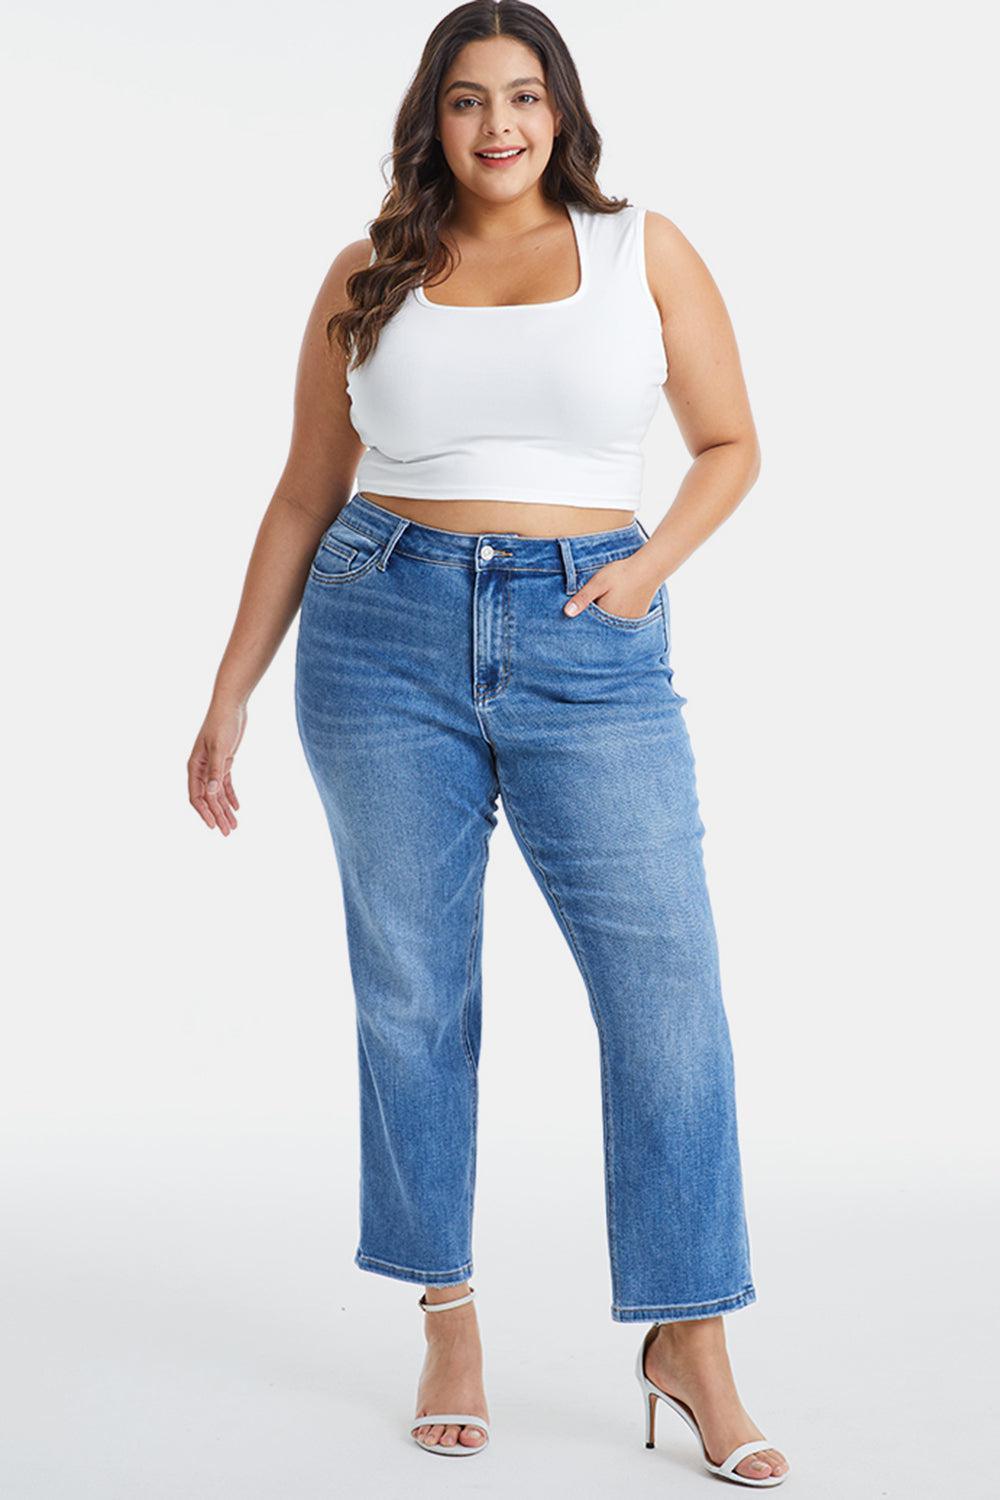 a woman wearing high rise jeans and a white tank top